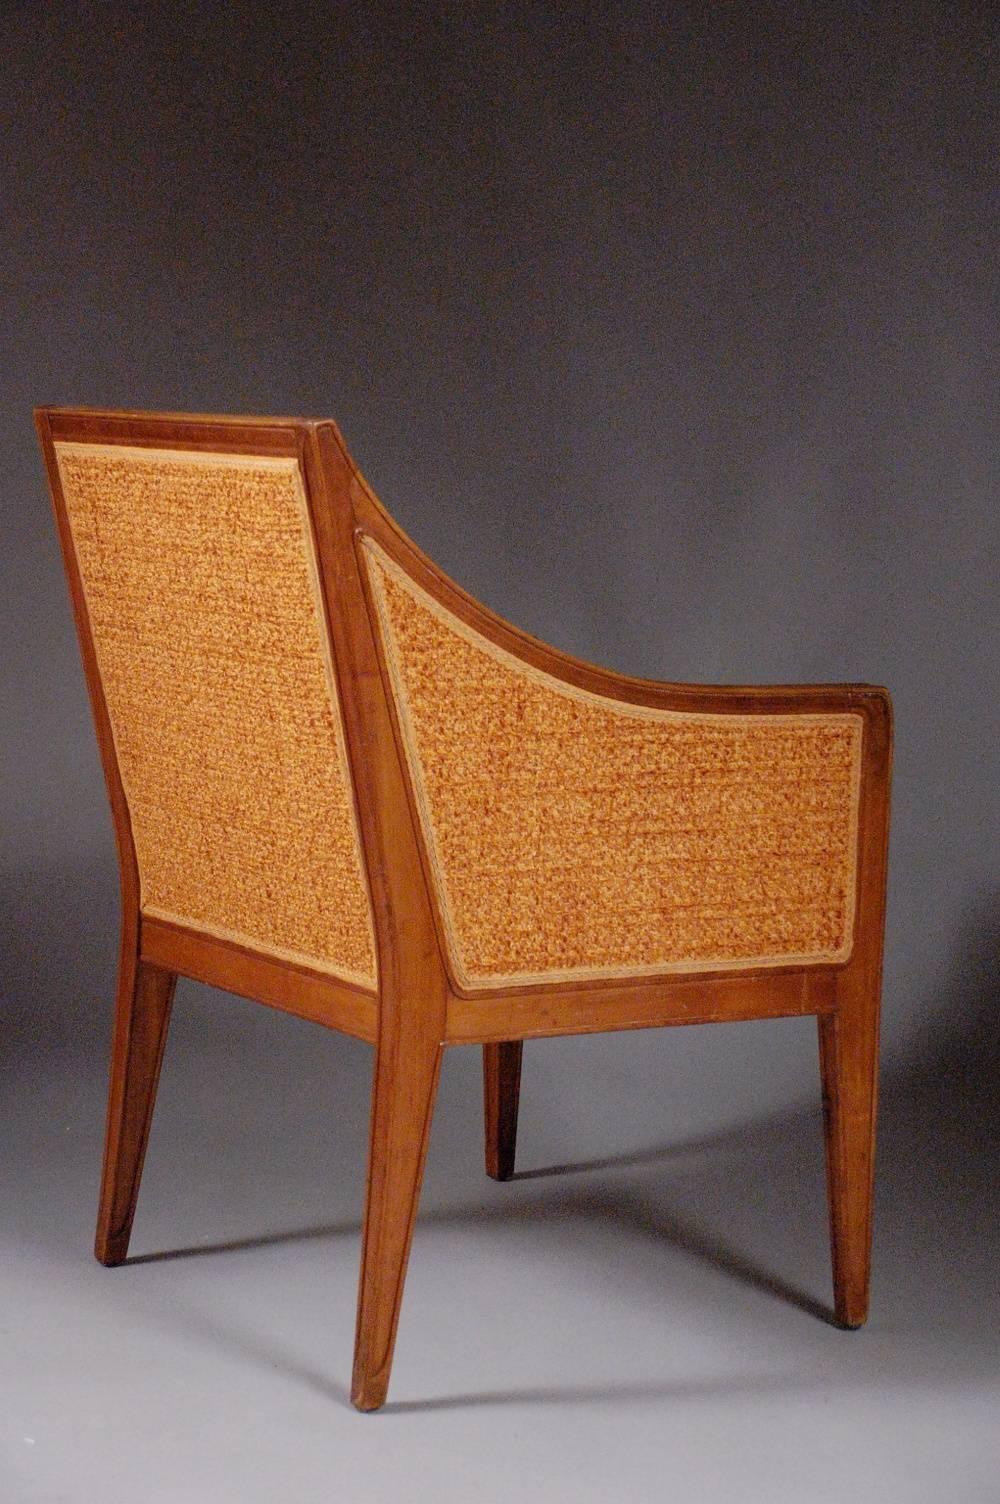 This beautiful pair of early Classic Art Deco armchairs by Leon Jallot were created in sculpted French walnut, circa 1912. Léon Jallot's career began as the cabinetmaking foreman for l'Art Nouveau Bing - the shop in Paris that gave the Art Nouveau